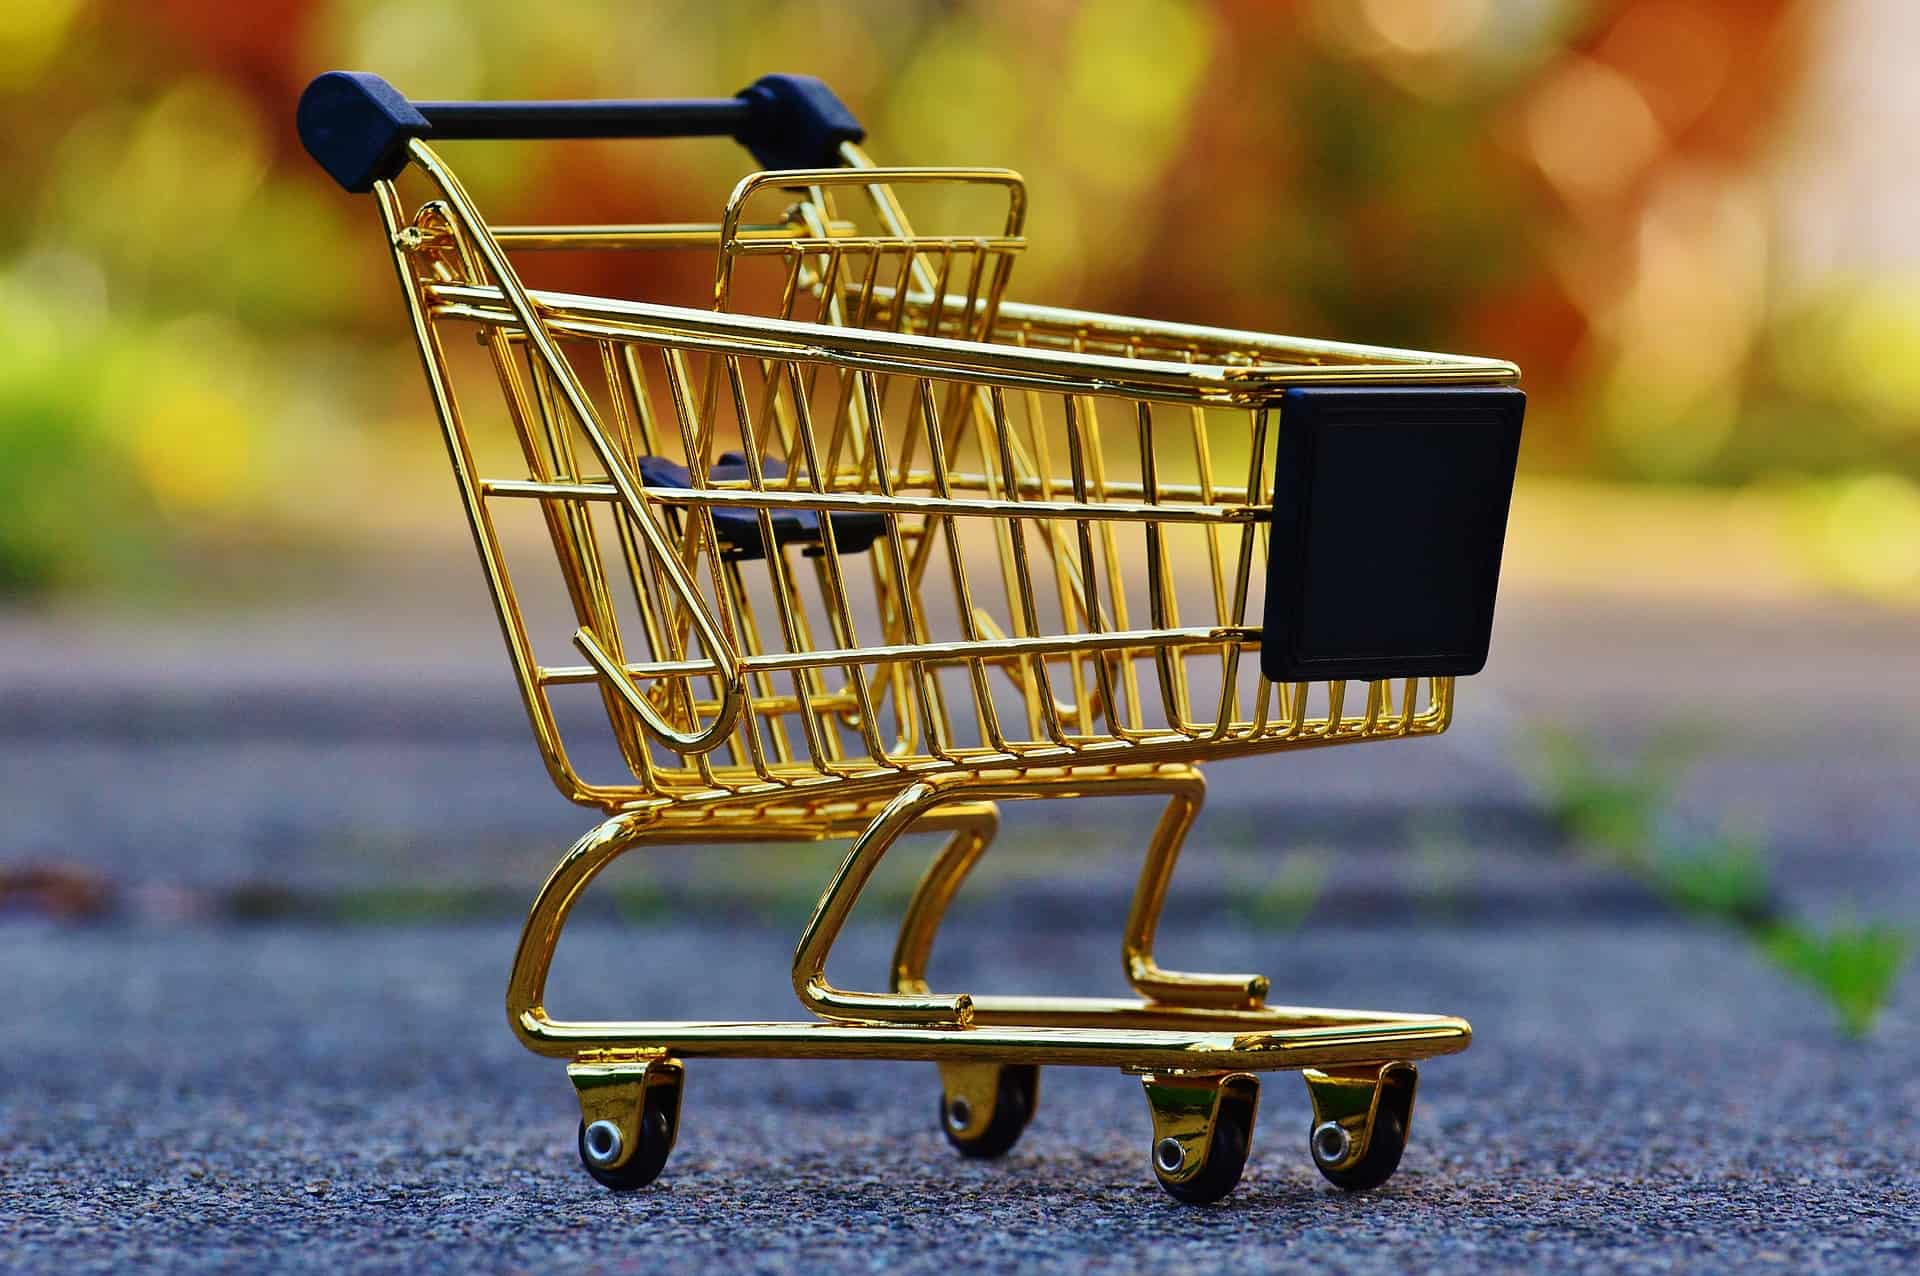 3 Ways For Ecommerce Companies To Reduce Cart Abandonment